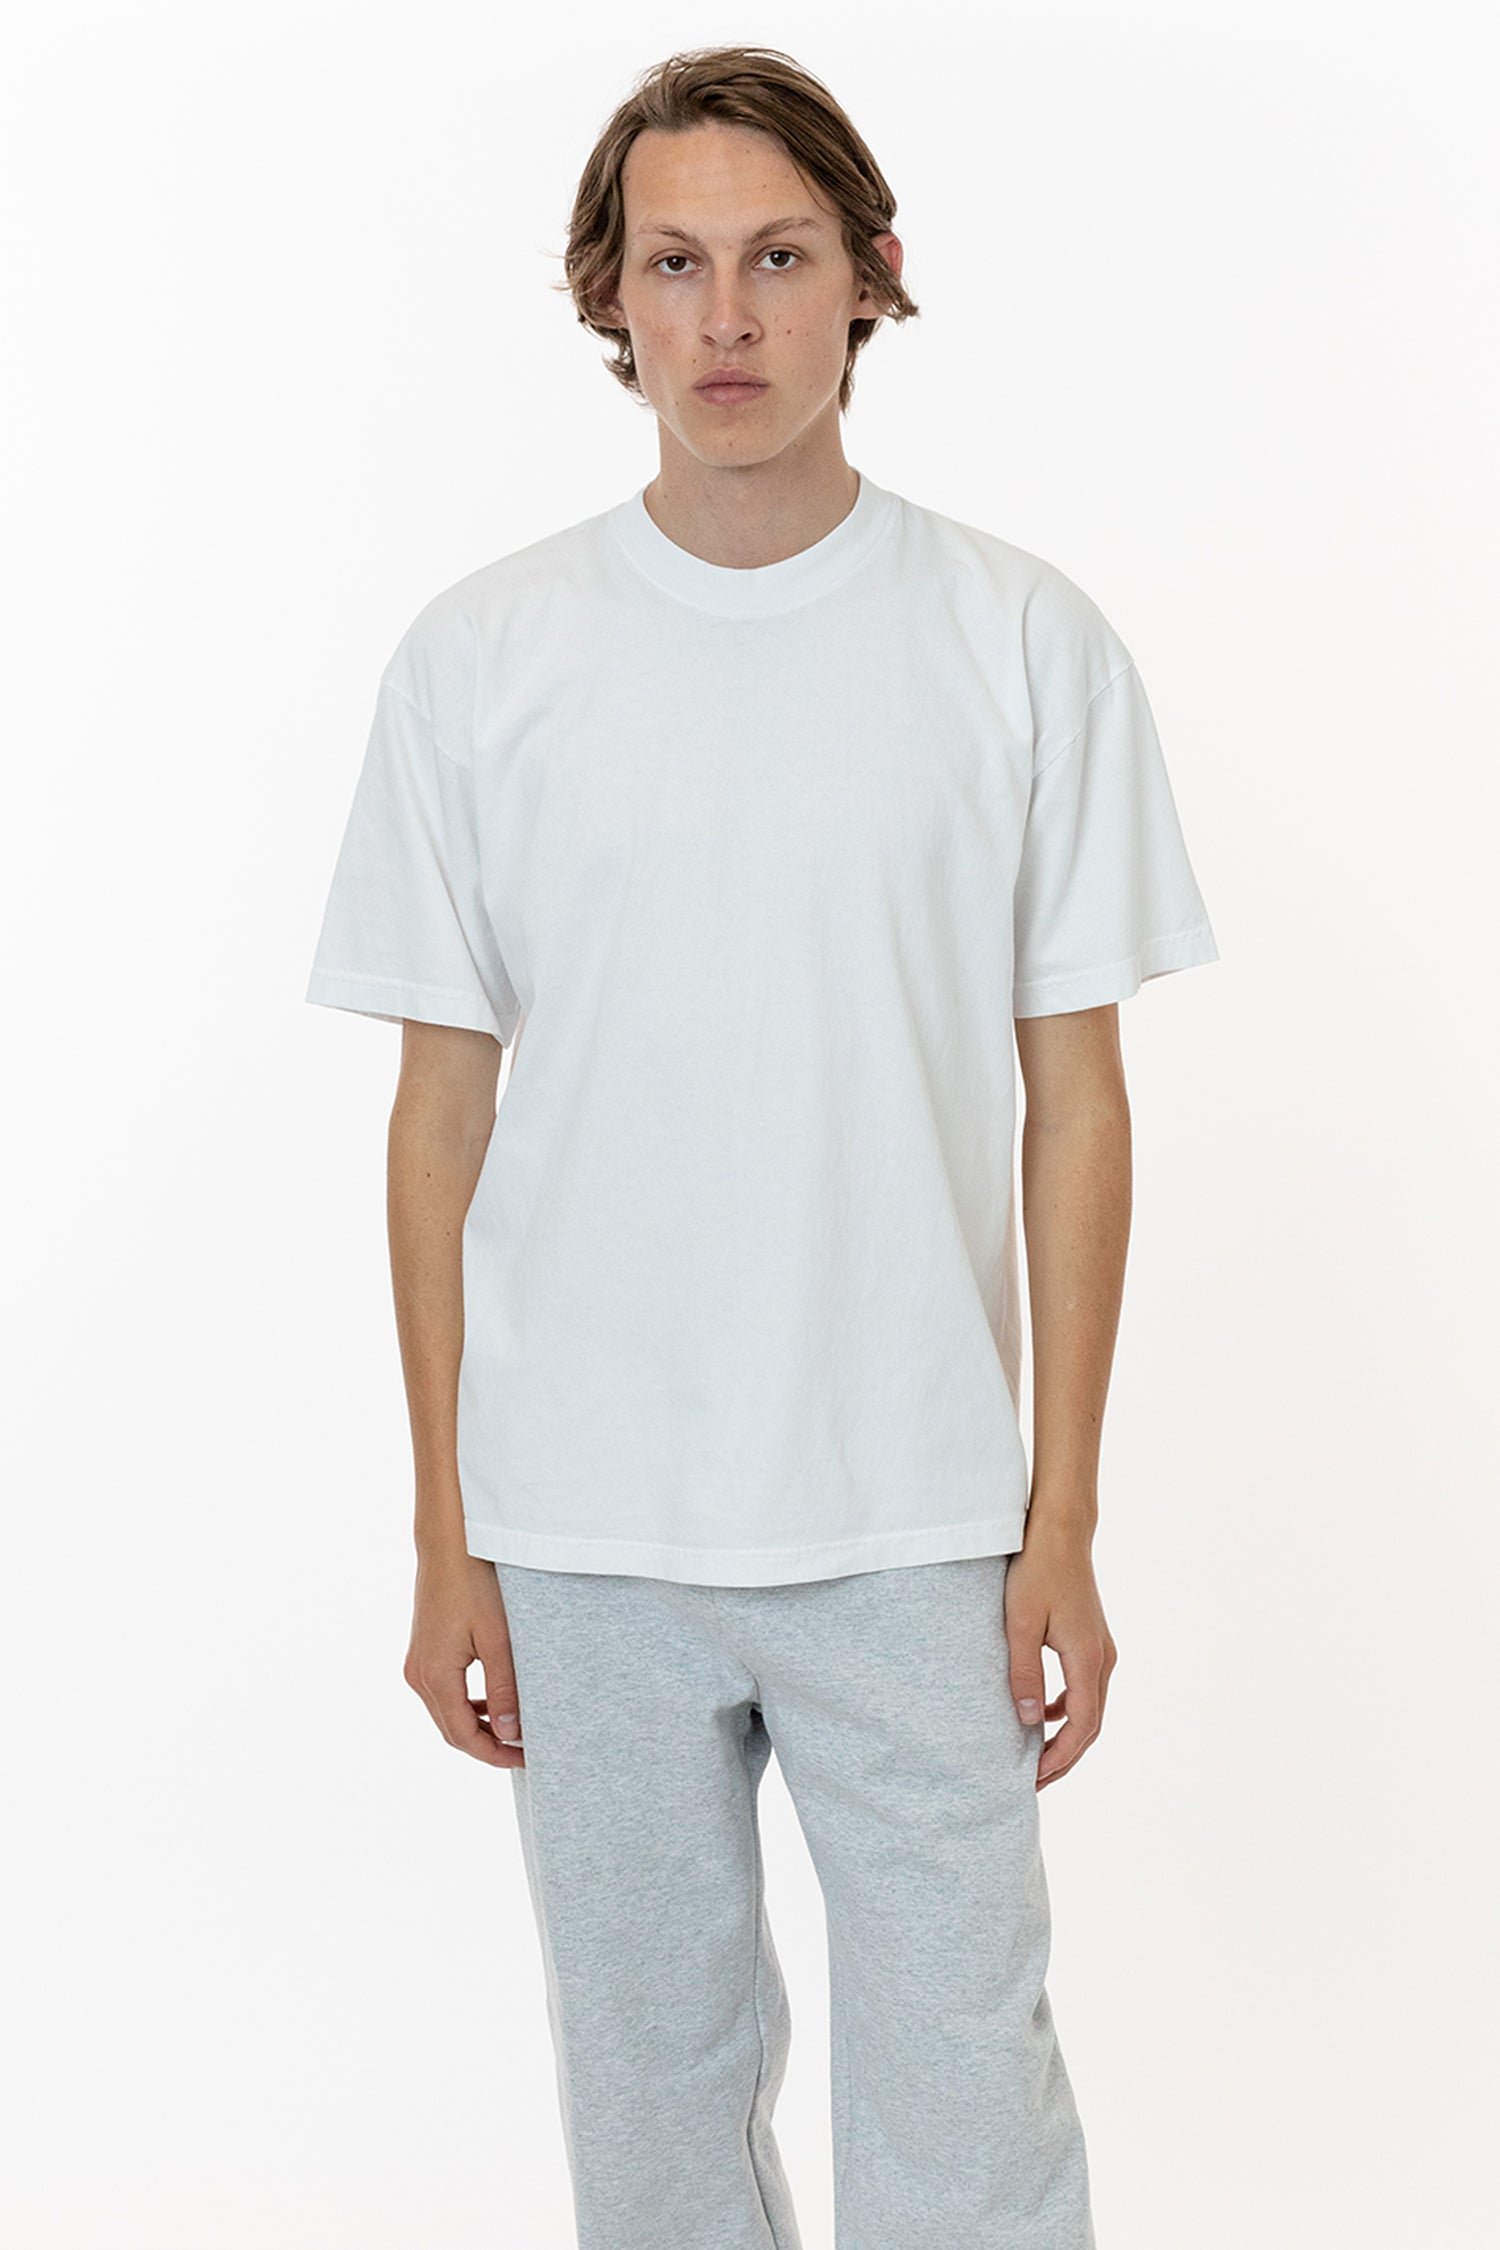 Los Angeles Apparel | The 1801 | Shirt 3XL in White